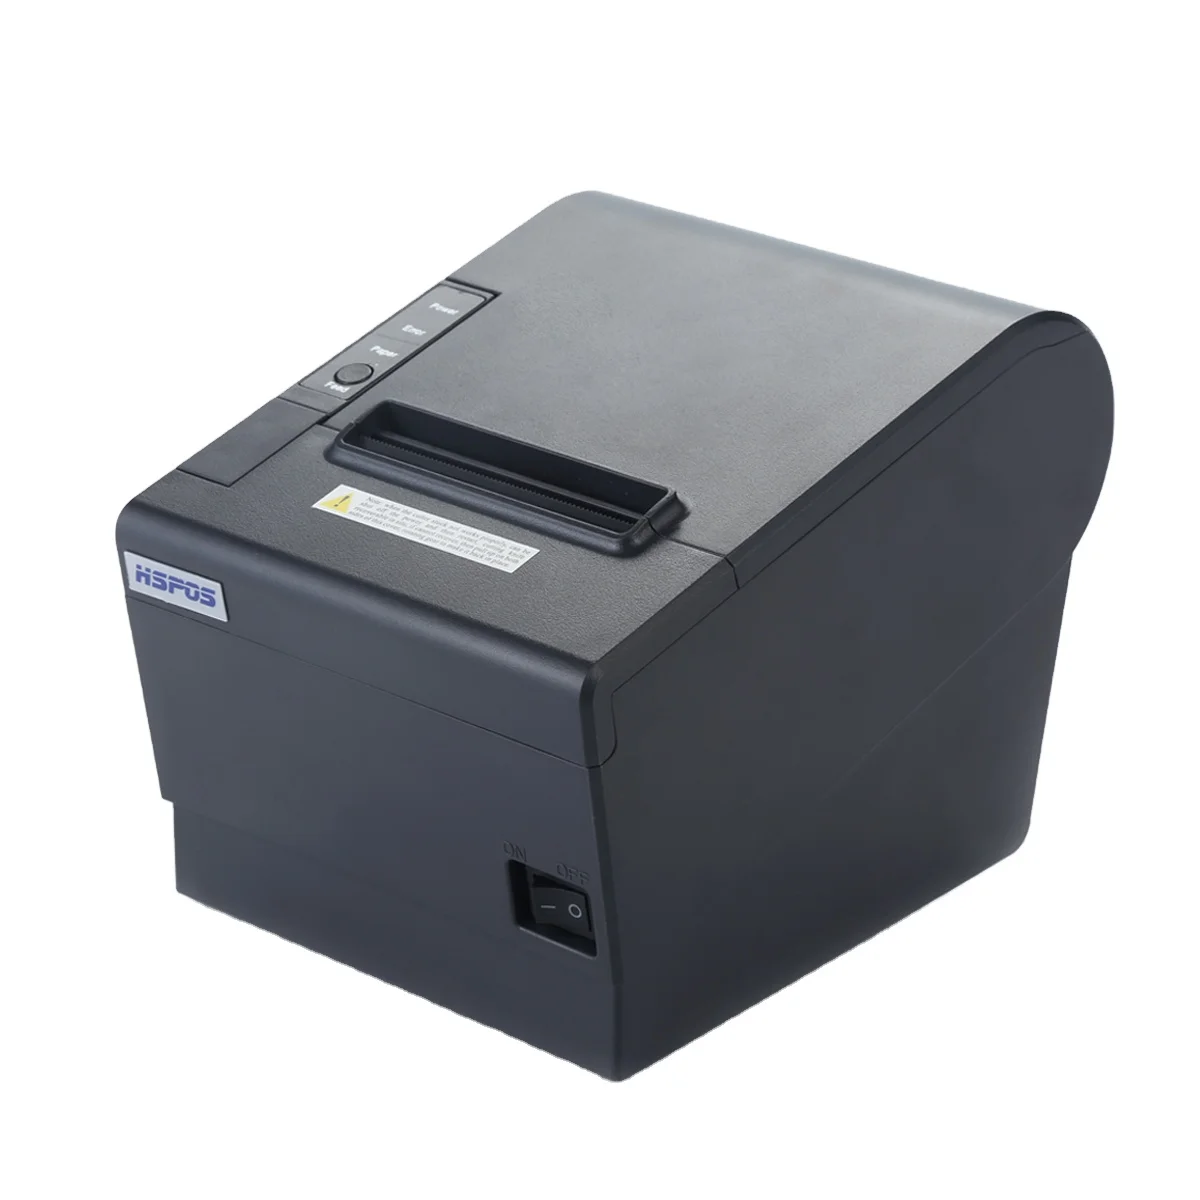 HSPOS 80mm Thermal Printer POS Receipt Printer USB Parallel Interface with Auto Cutter (1600677752001)